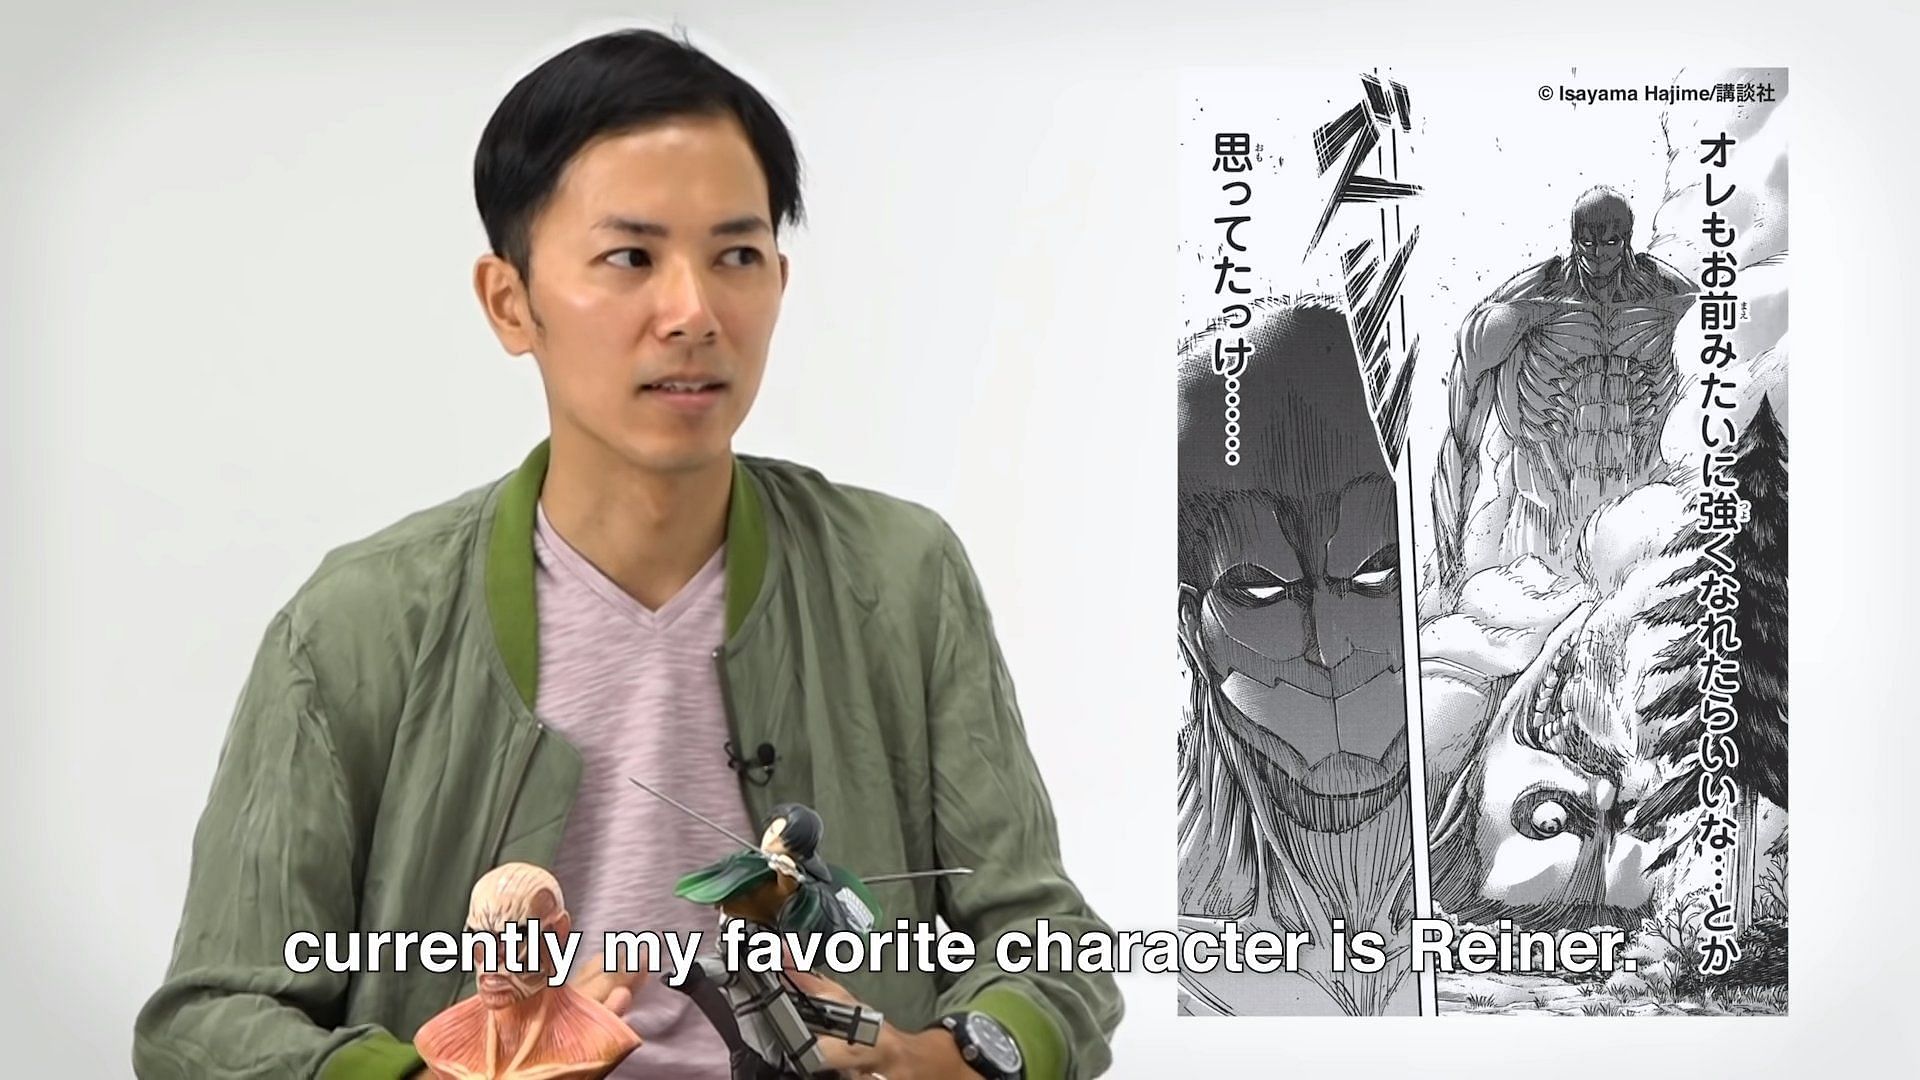 Isayama in an interview (credit : Funimation)